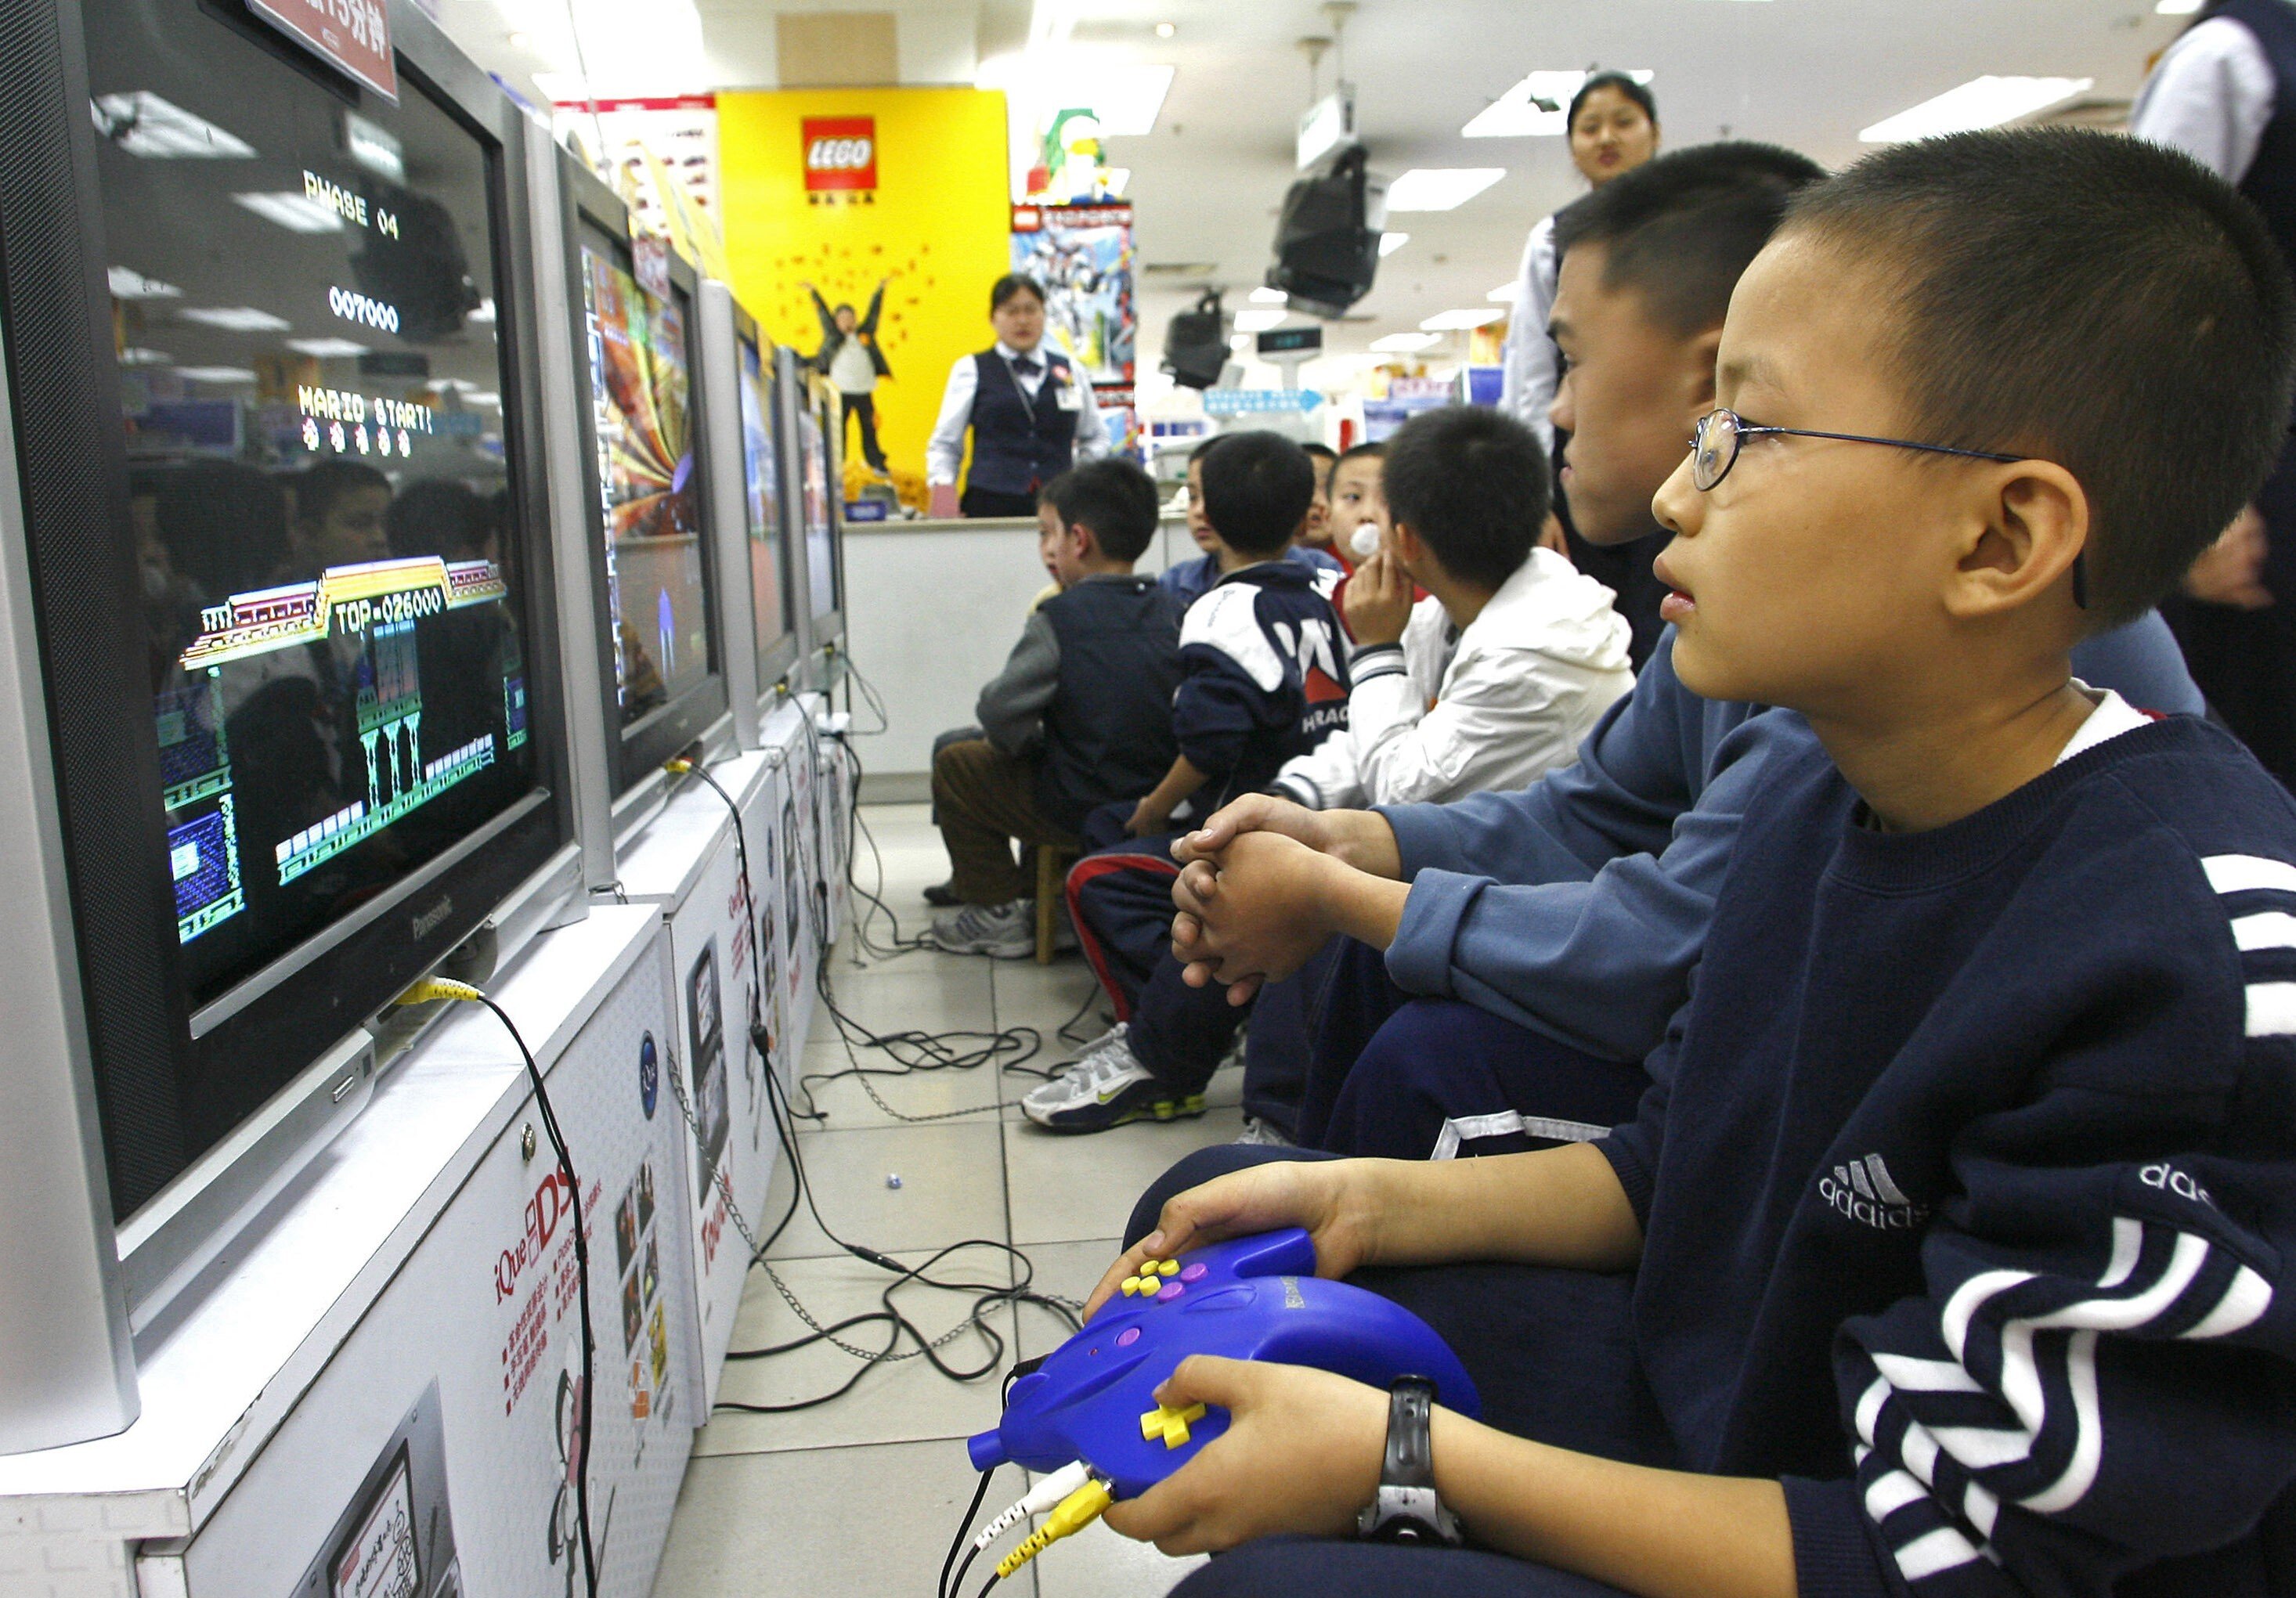 Children play the video games on TVs at a shopping centre in Chengdu, in China's southwestern Sichuan province, on October 30, 2006. The Chinese government has long had an uncomfortable relationship with video games, and it ramped up restrictions for minors again this year. Photo: AFP